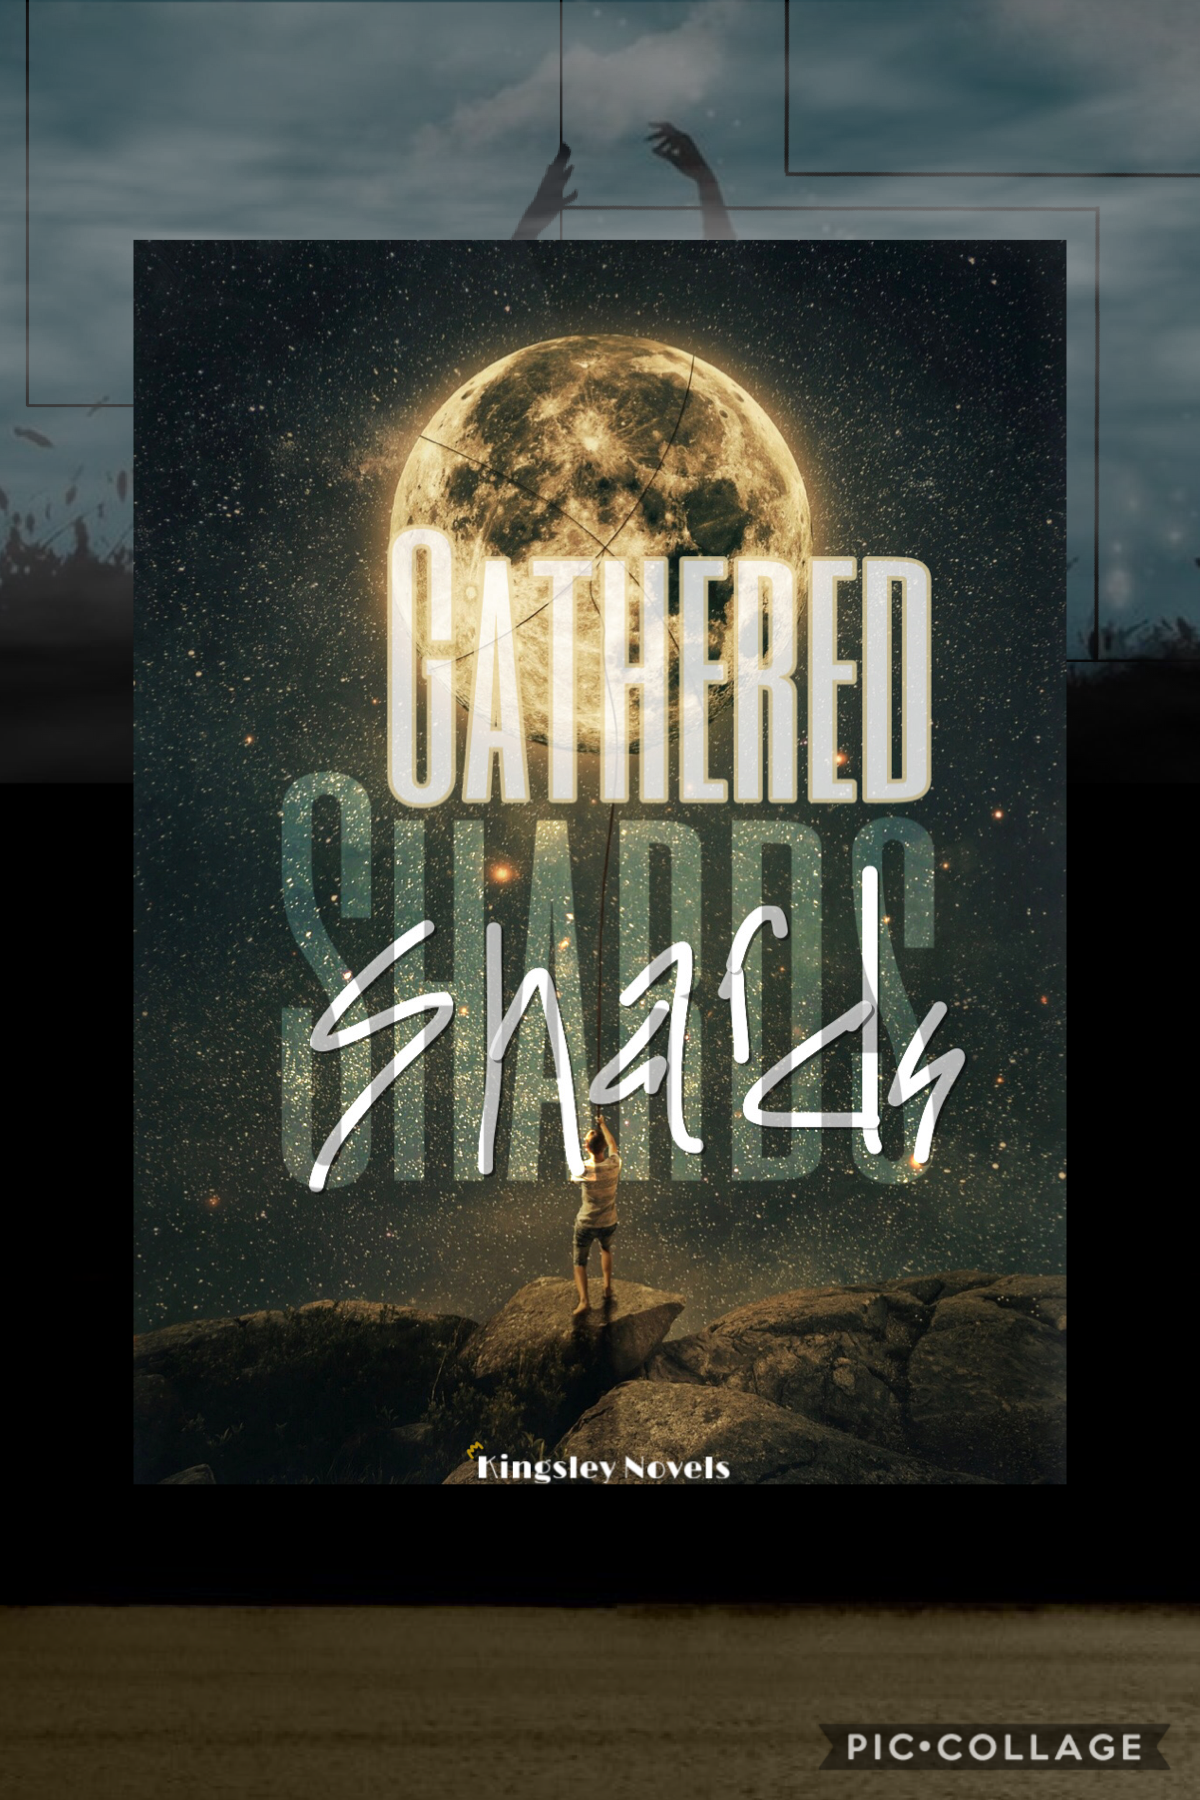 Find my new short story Gathered Shards on Wattpad @C10UD3DM1ND 